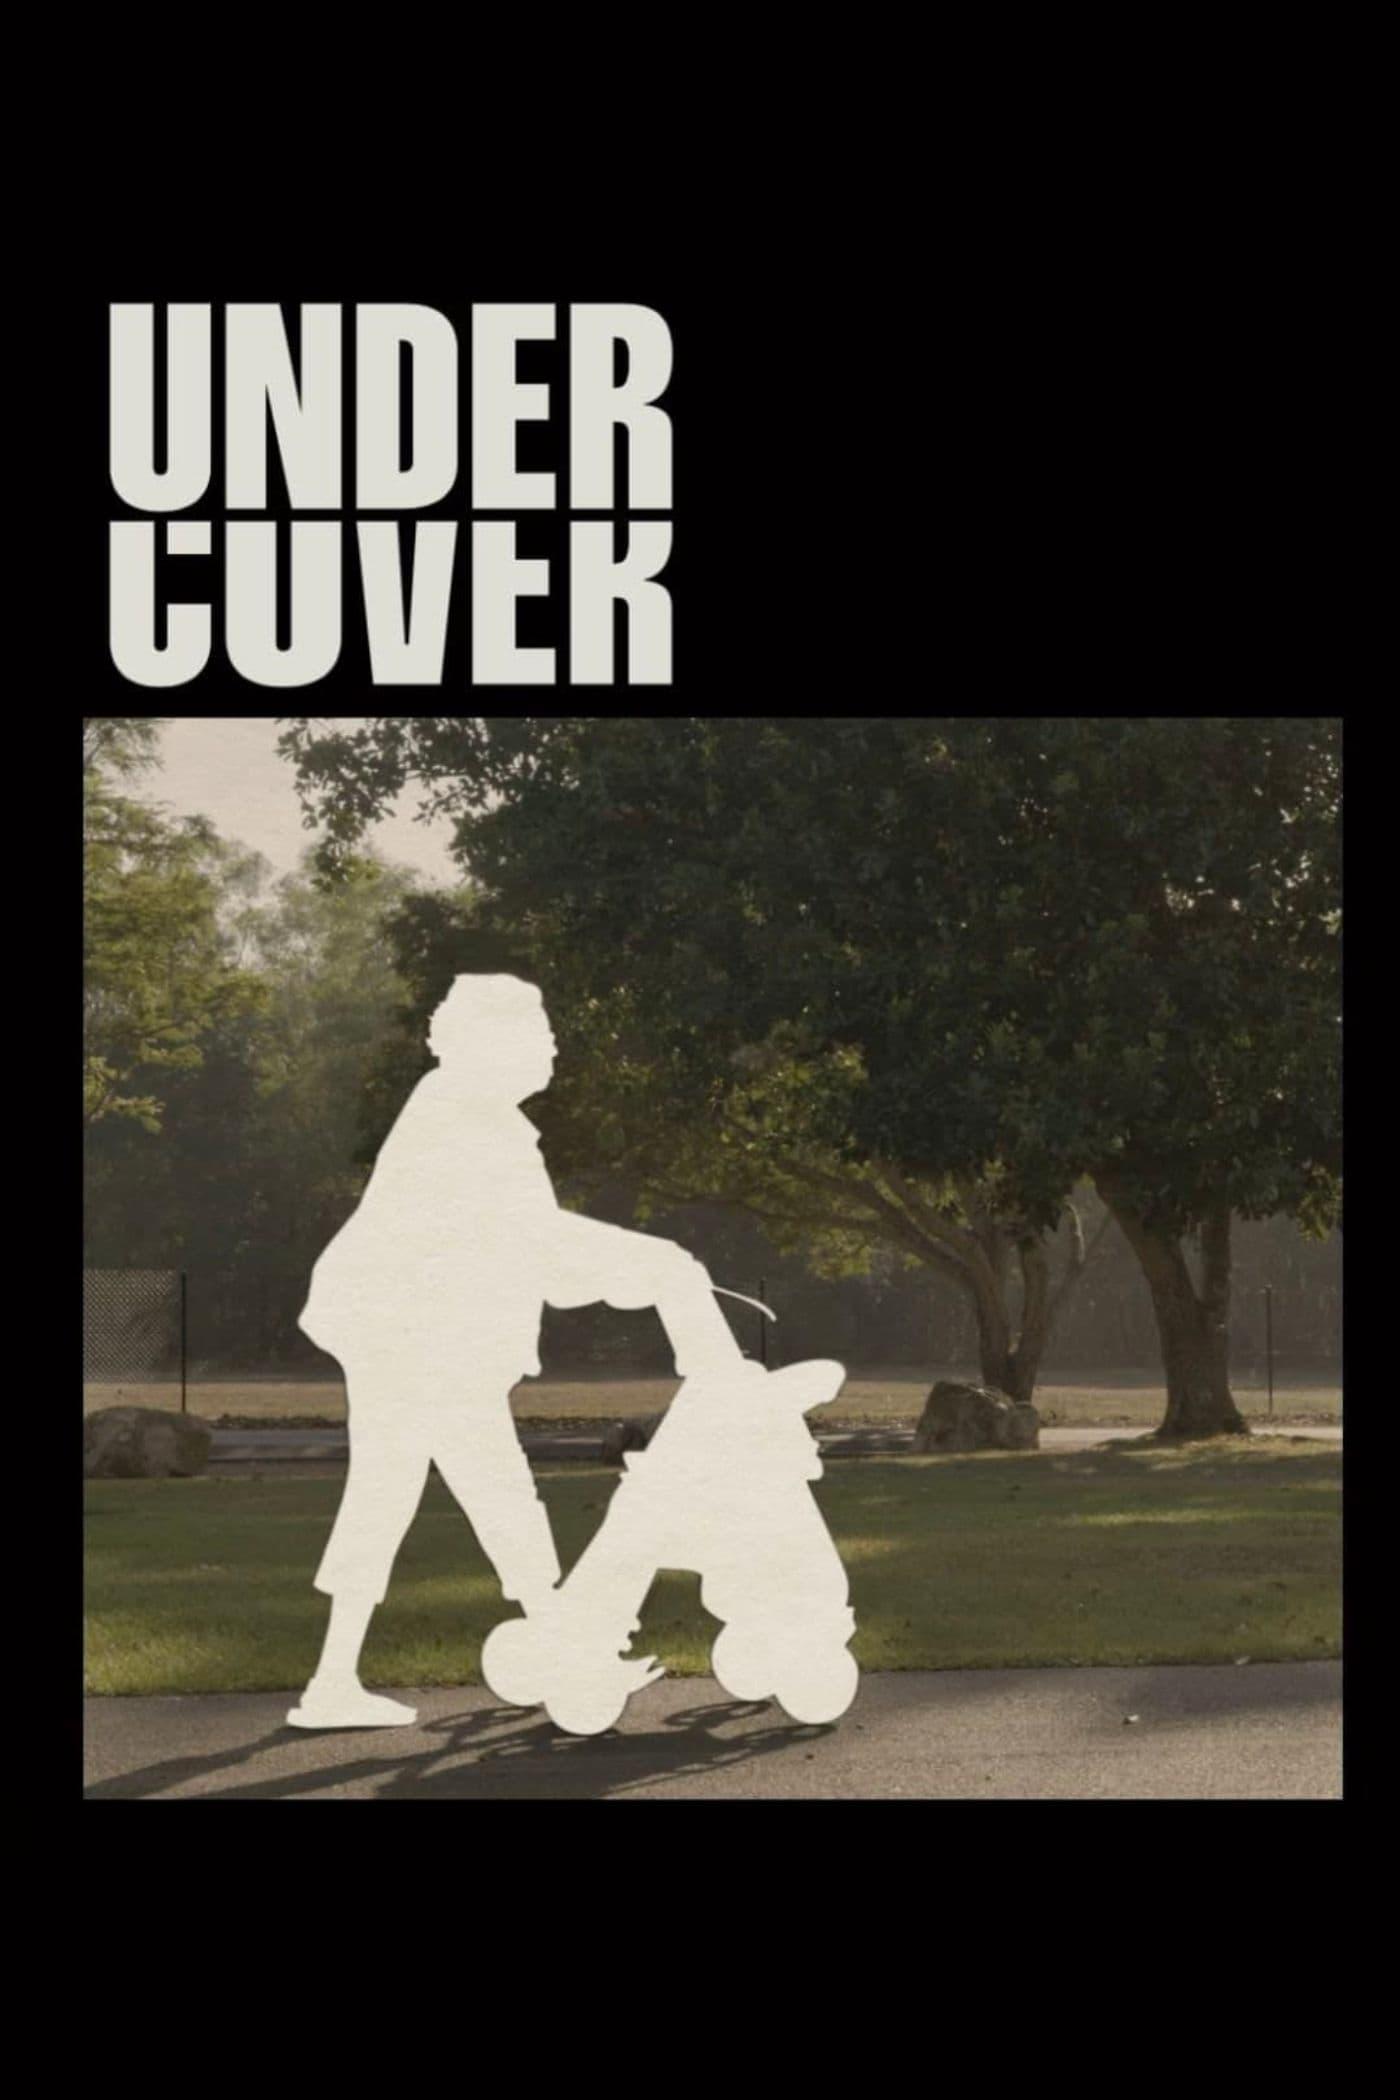 Under Cover poster